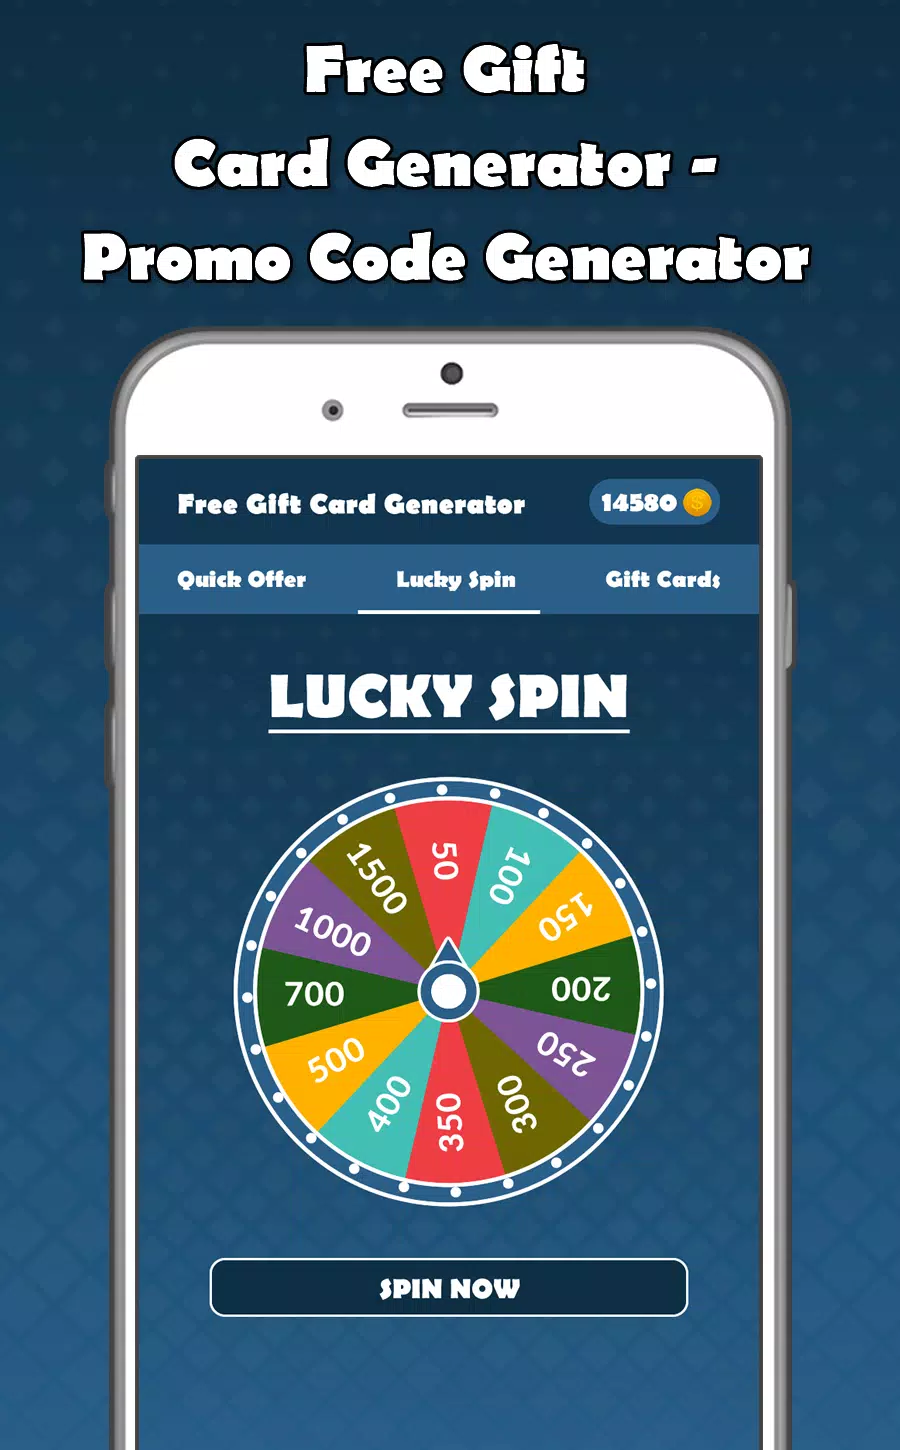 Free Gift Card Generator - Promo Code Generator for Android - APK Download